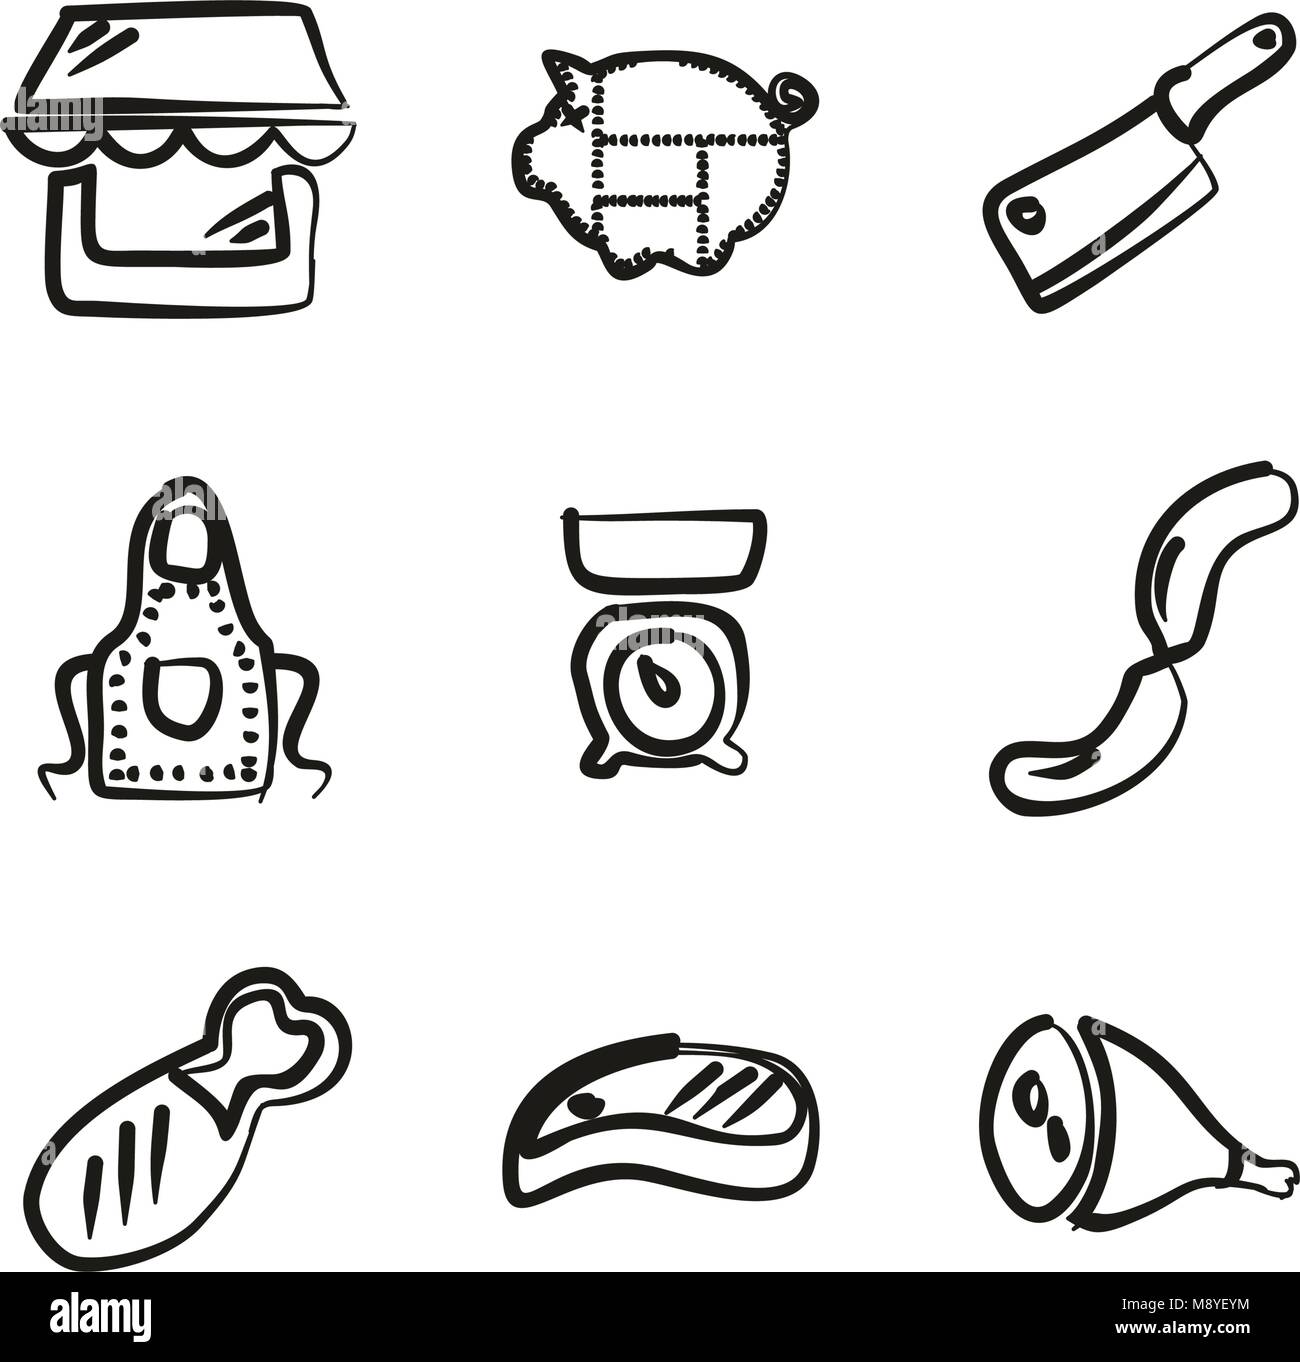 Butcher Shop Icons Freehand Stock Vector